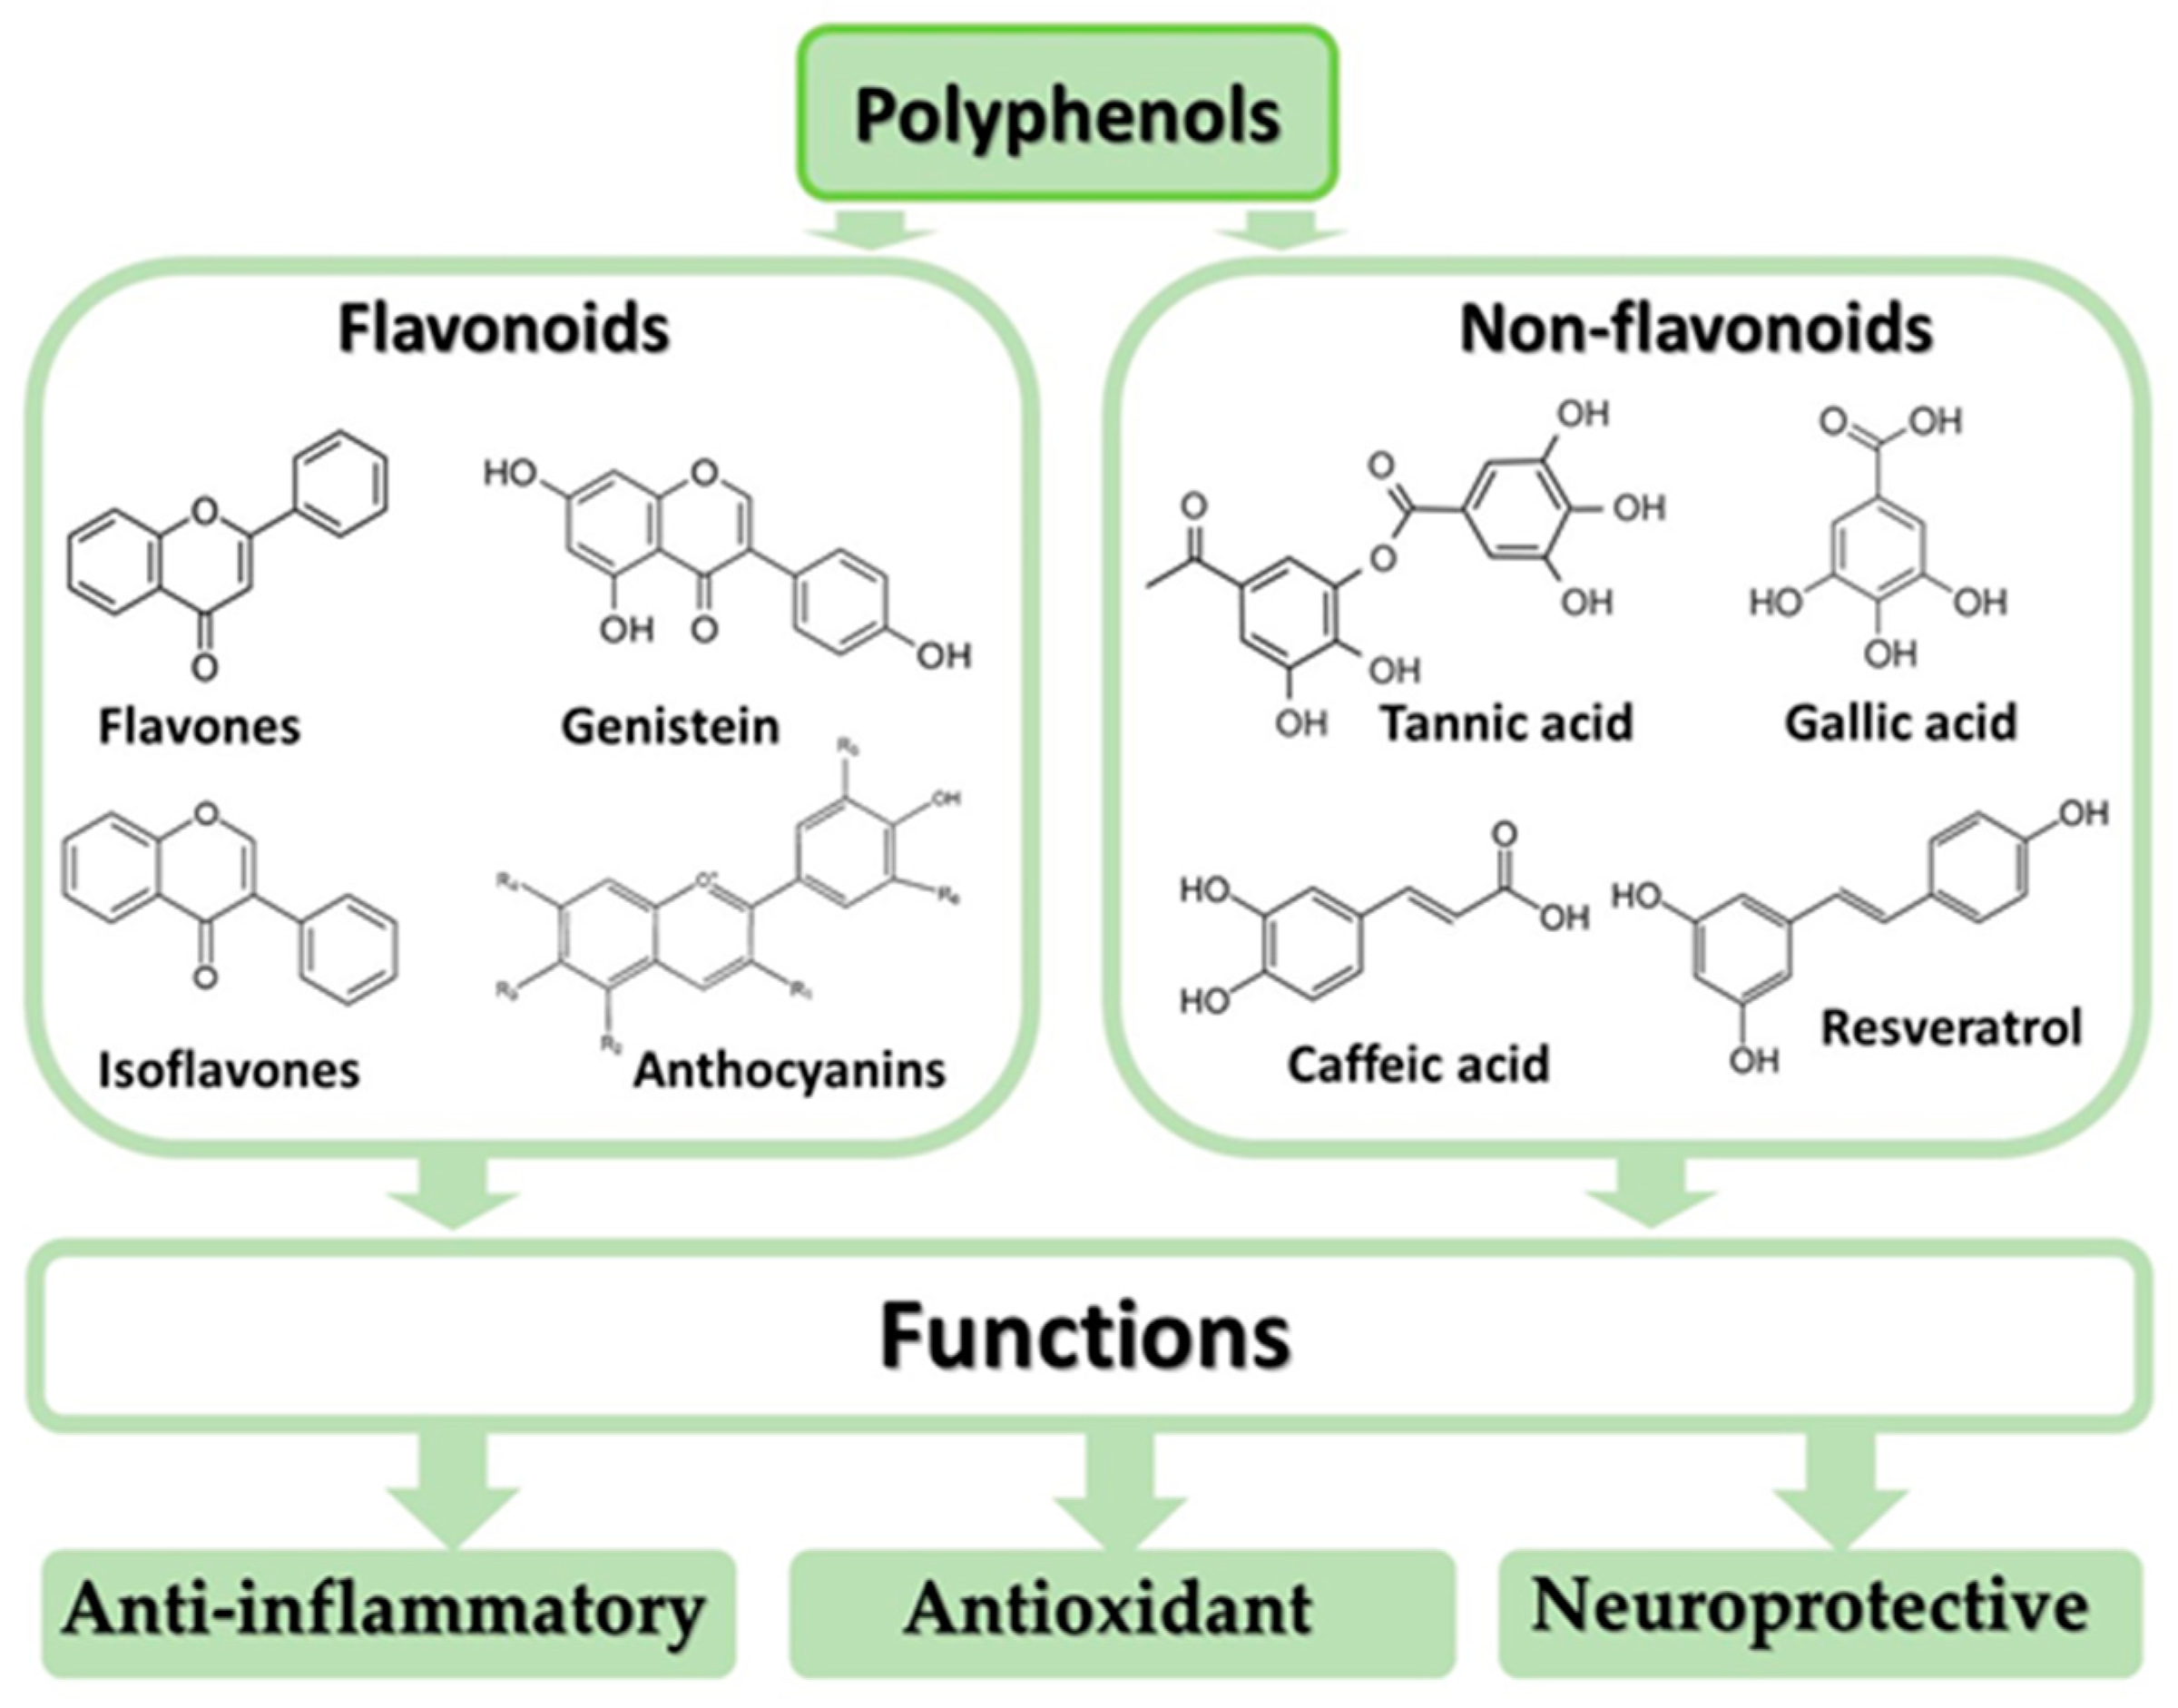 Full article: Anxiolytic effects of theaflavins via dopaminergic activation  in the frontal cortex